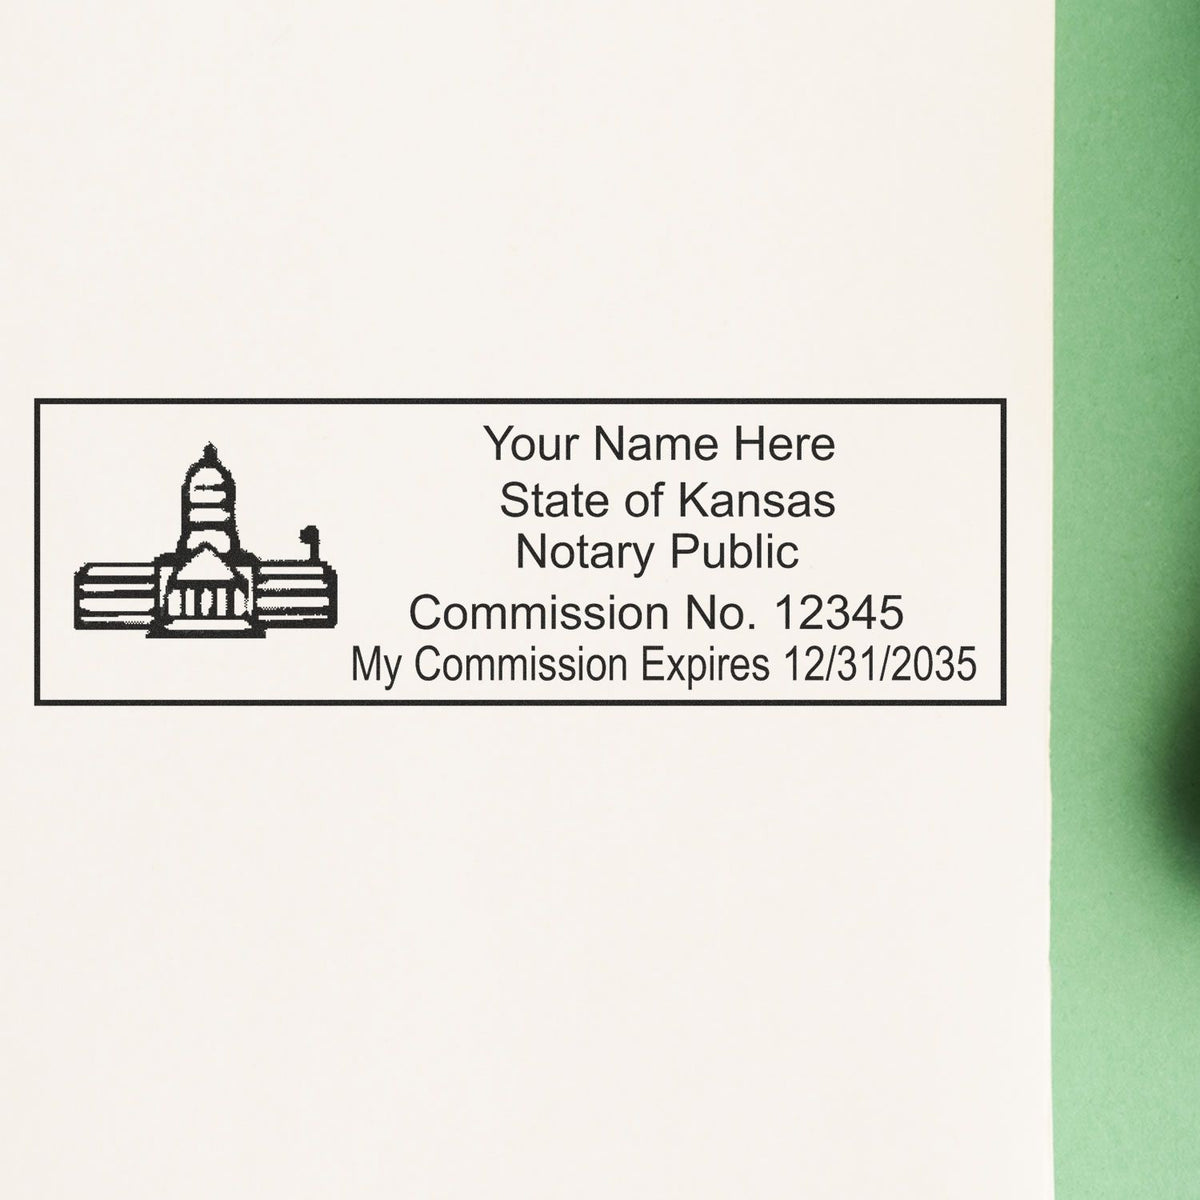 An alternative view of the PSI Kansas Notary Stamp stamped on a sheet of paper showing the image in use